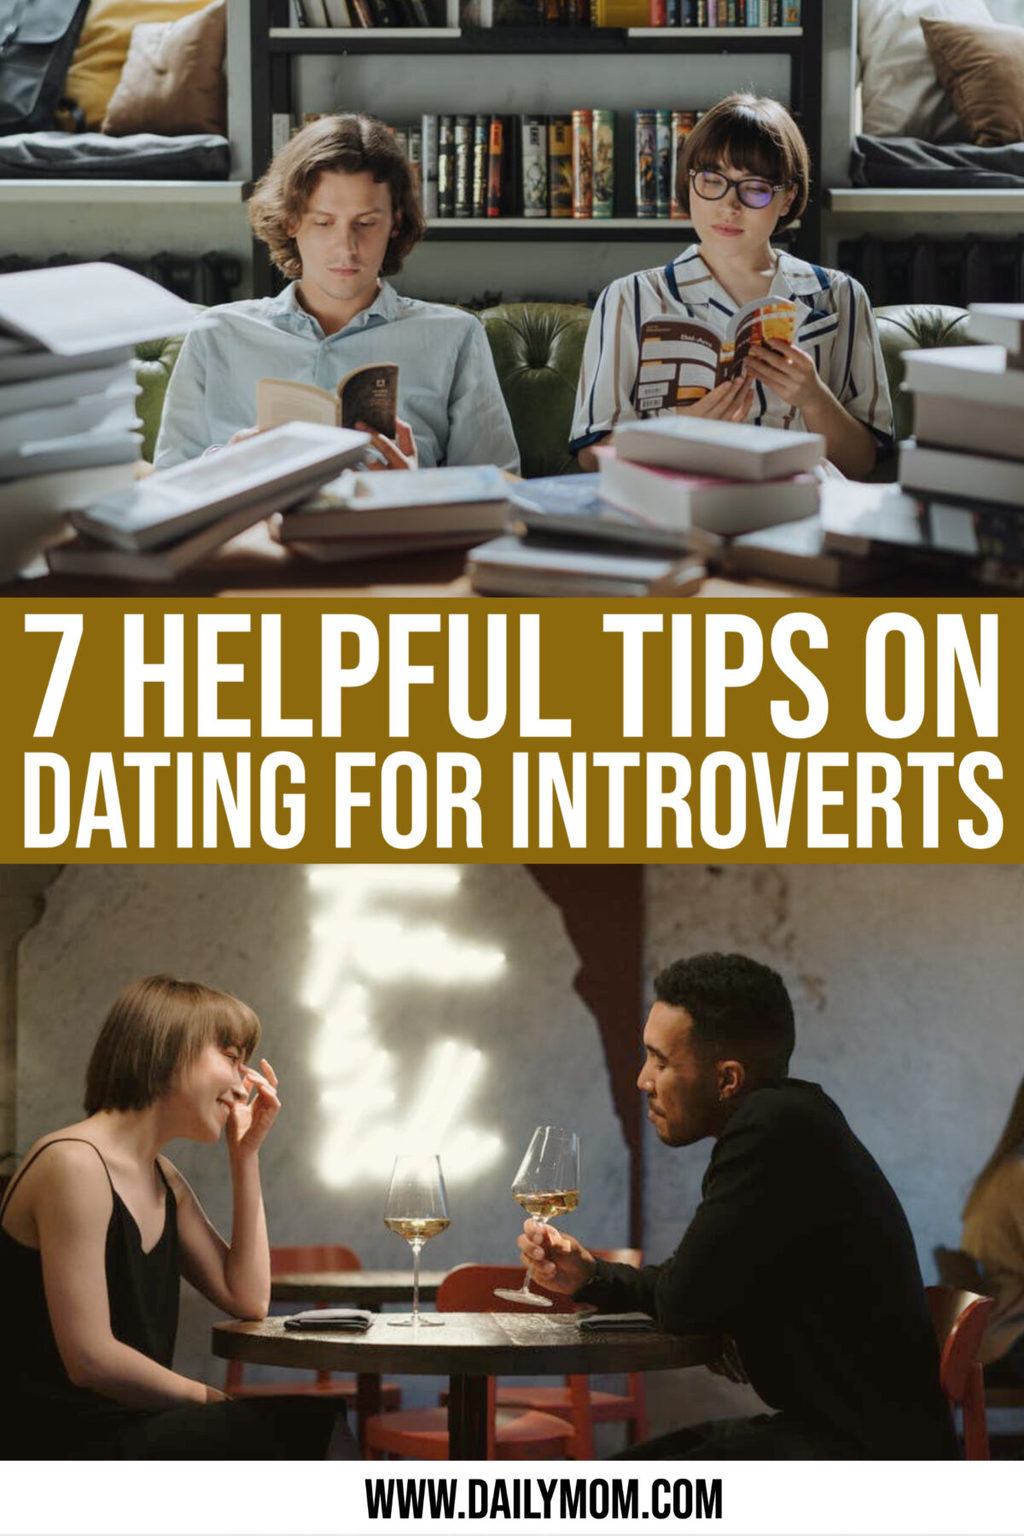 7 Helpful Tips On Dating For Introverts